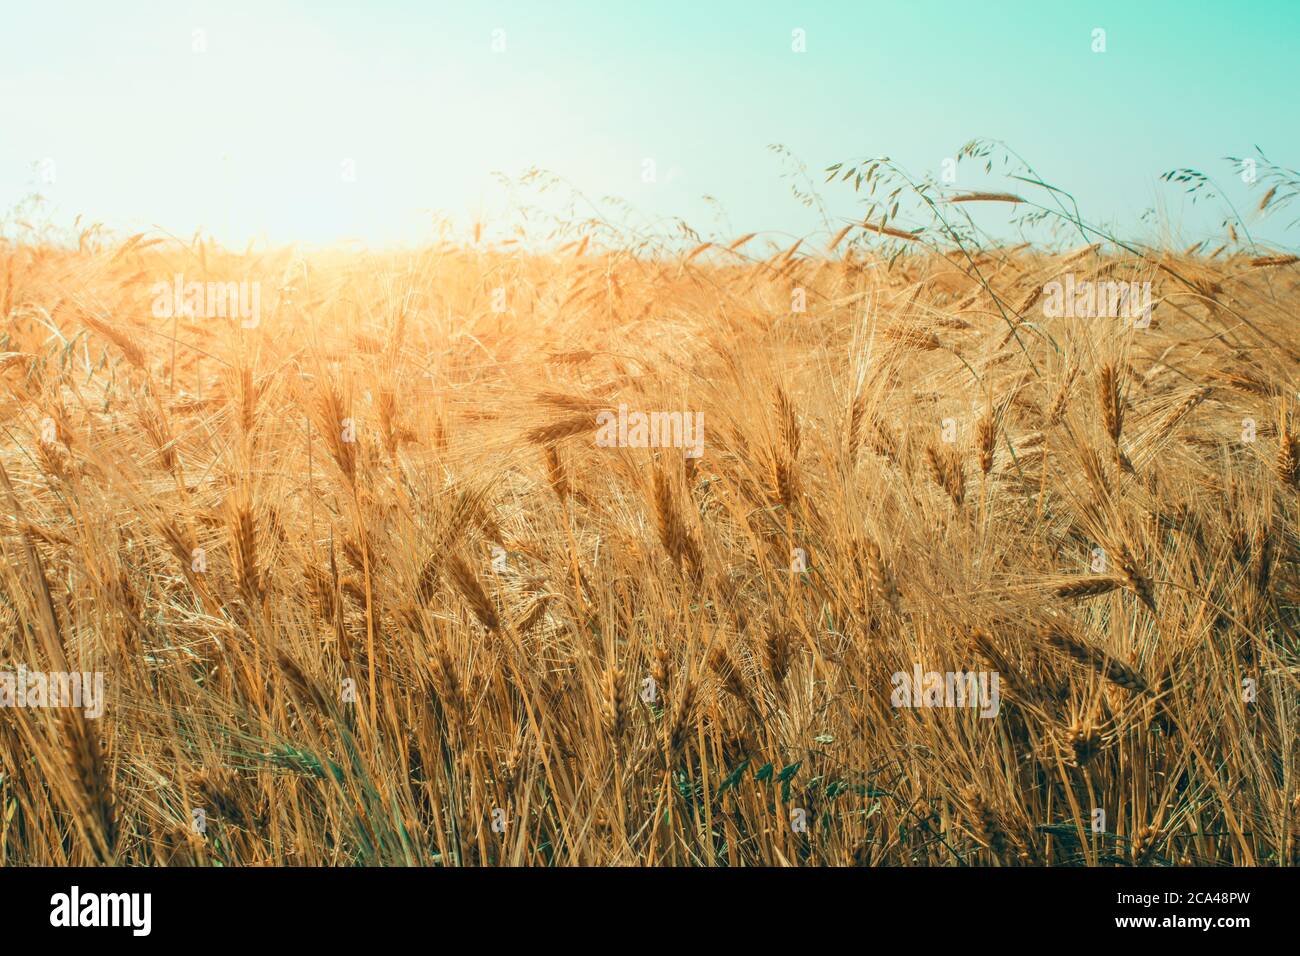 Golden wheat field at sunny day with blue sky as background with copyspace. Rural scenery with ripening ears of golden wheat under beautiful sunlight Stock Photo